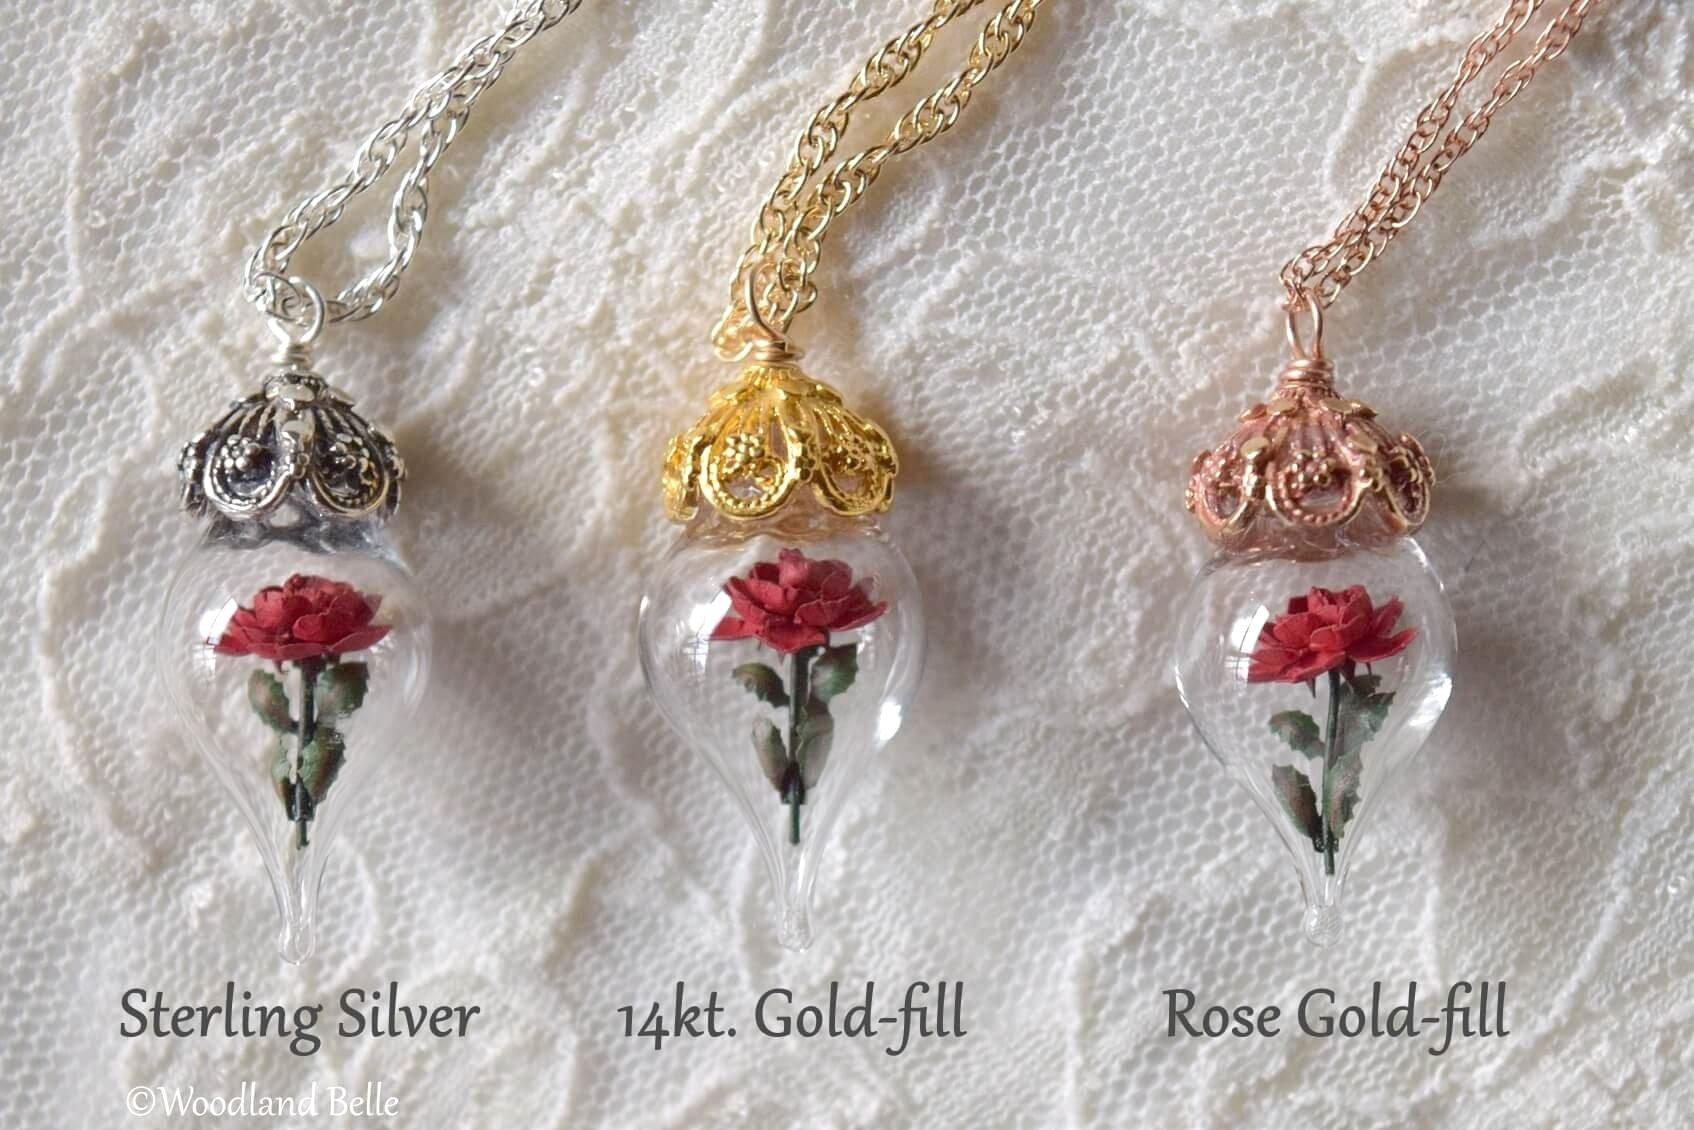 Rose Gold Red Rose Necklace - Flower Glass Pendant - Pink Gold Beauty & the Beast Necklace - Personalized Initials/Date, Gift for Wife